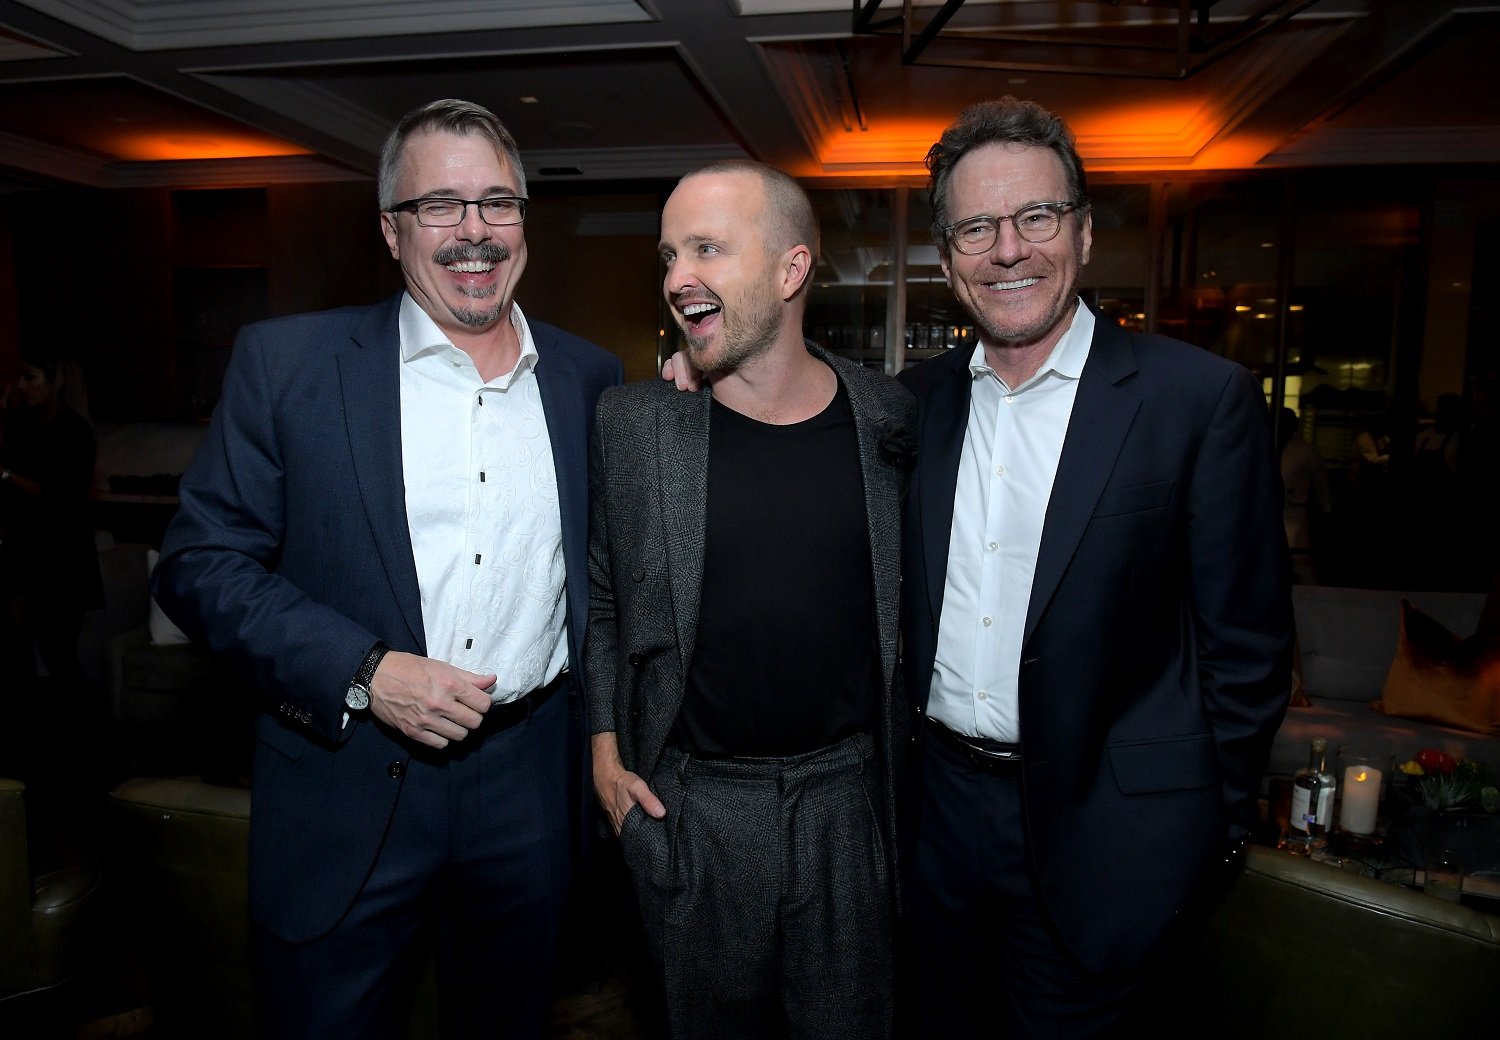 Breaking Bad writer Vince Gilligan, and stars Aaron Paul and Bryan Cranston